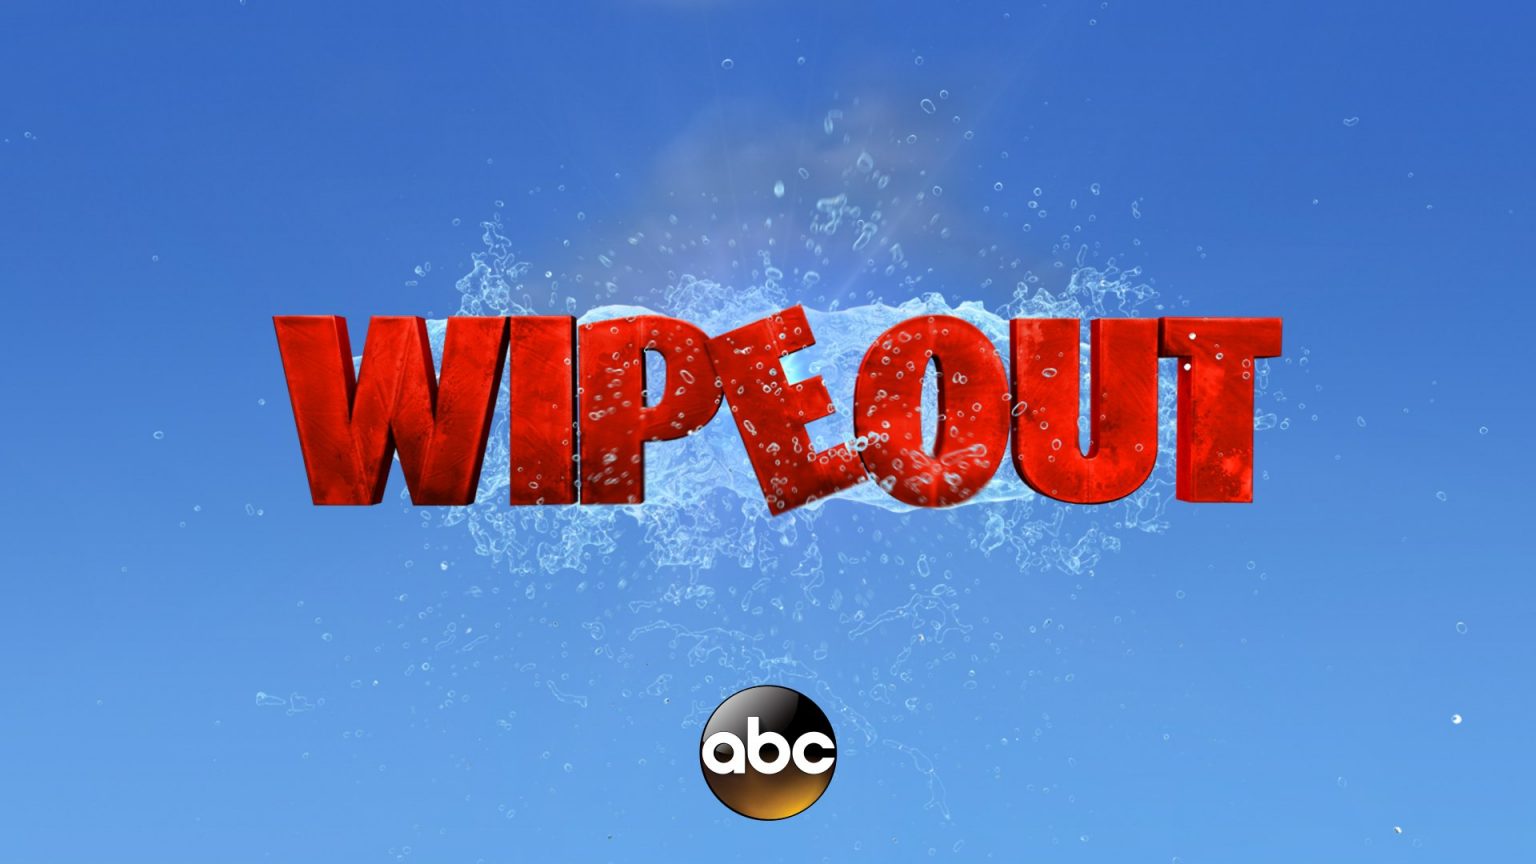 download wipeout tbs streaming